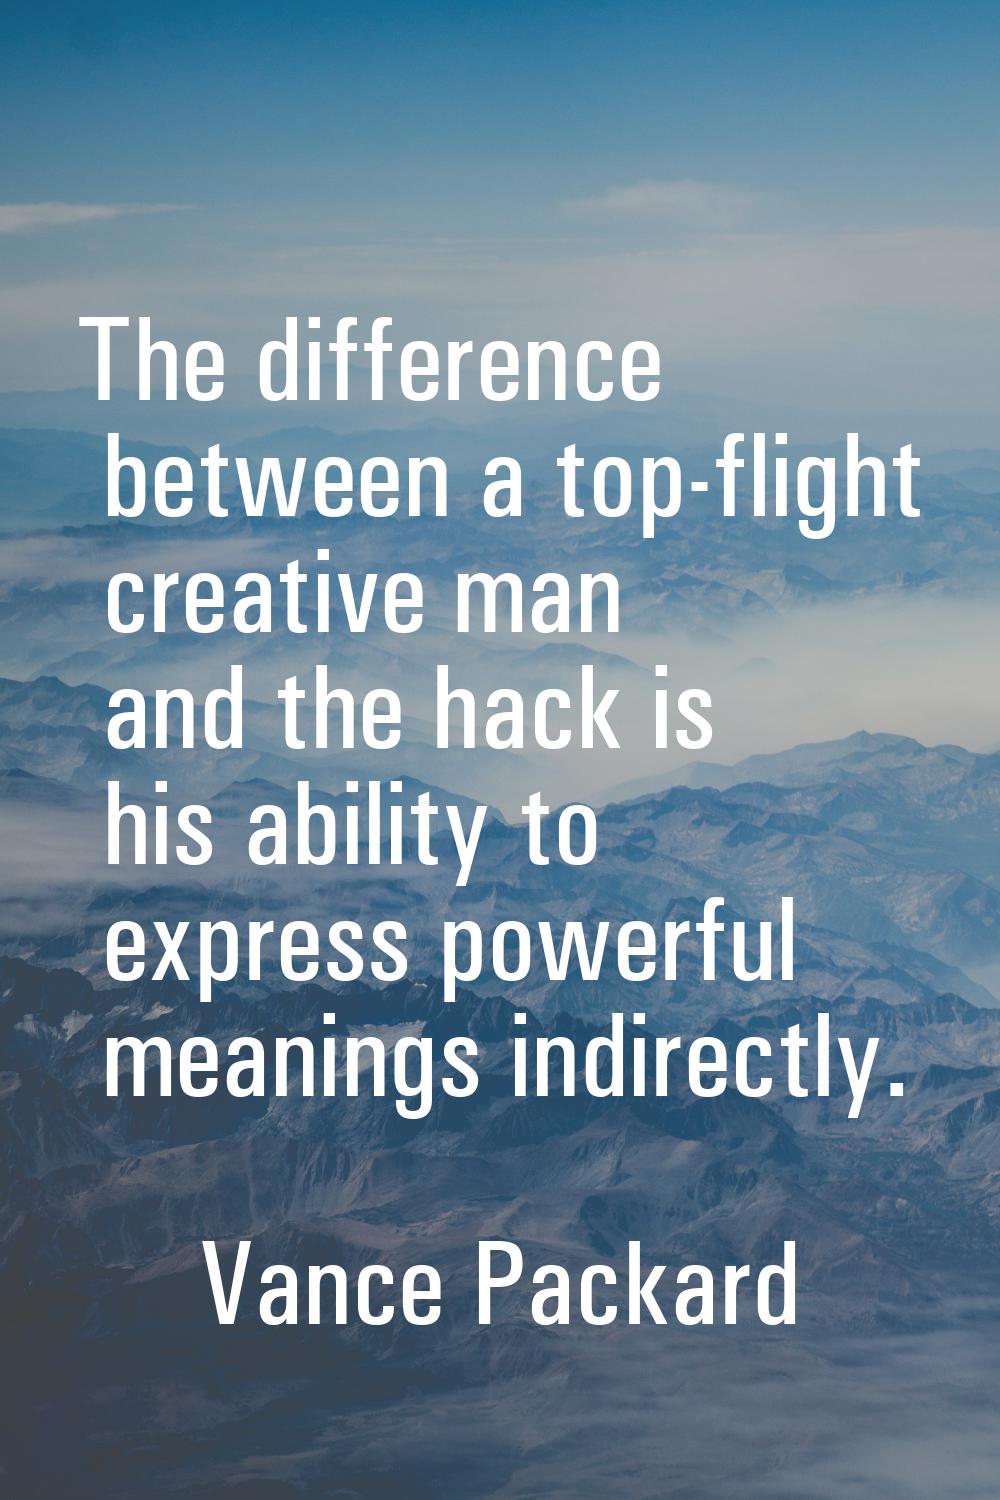 The difference between a top-flight creative man and the hack is his ability to express powerful me